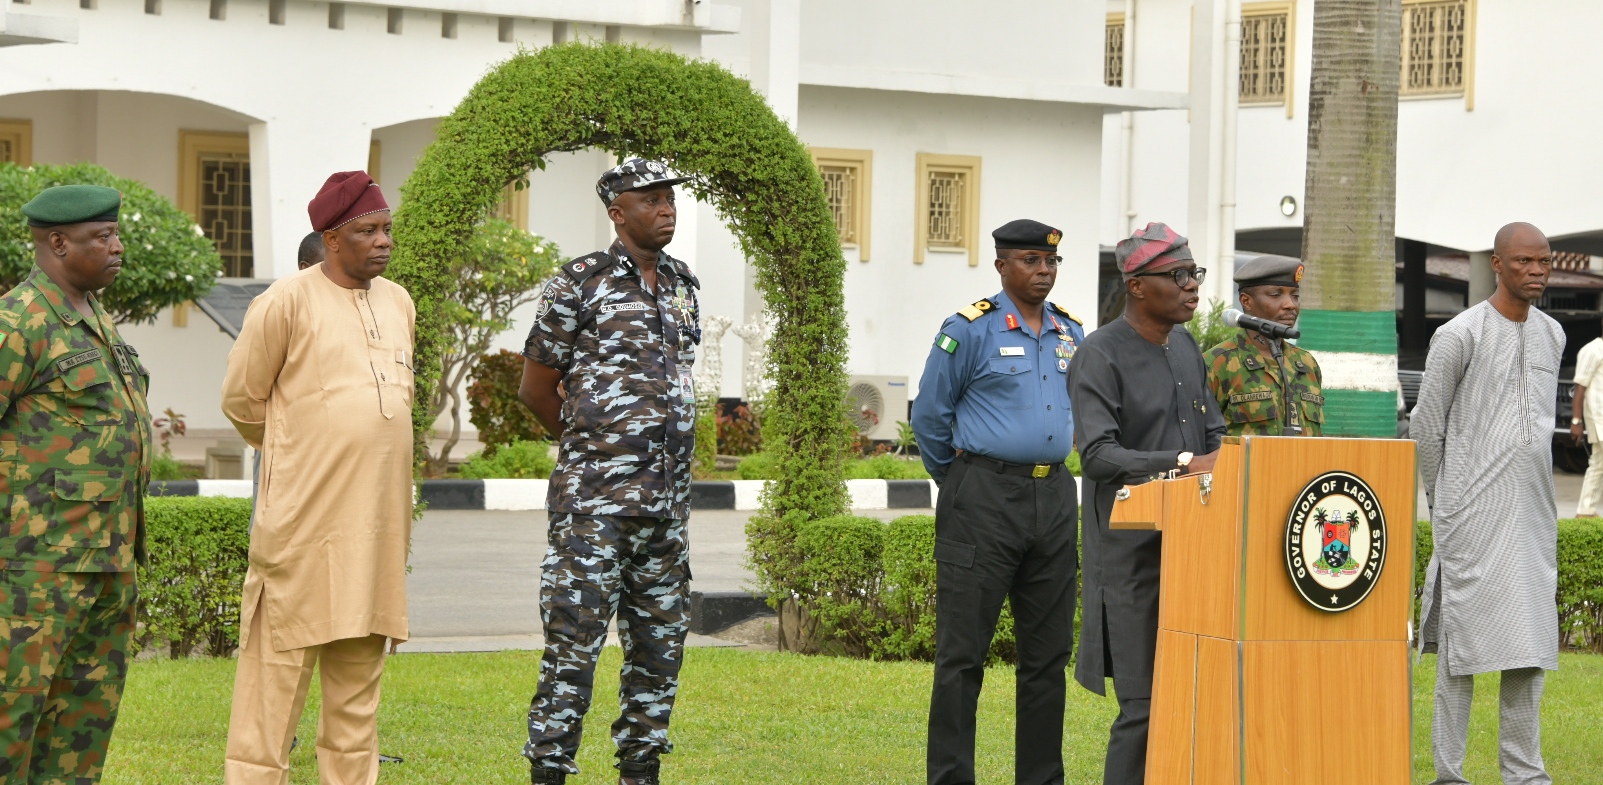 Lagos State Governor, Mr. Babajide Sanwo-Olu; briefing journalists after the State Security Council meeting at Lagos House, Marina, on Saturday, April 4, 2020. With him (L-R): Commander, 9 brigade, Ikeja Army Cantonment, Brigadier General Etsu Ndagi; Director, Department of Security Service (DSS), Mr. Abdulfatai Sanusi; Commissioner of Police, Lagos Command, Mr. Hakeem Odumosu; Commander, Nigeria Navy Ship (NNS) Beecroft, Apapa, Commodore Ibrahim Aliyu Shettima; Commander, 651 Base Services Group, Nigerian Air Force Base, Ikeja, Air Commodore Rasaq Olanrewaju and the Chief of Staff to the Governor, Mr. Tayo Ayinde.